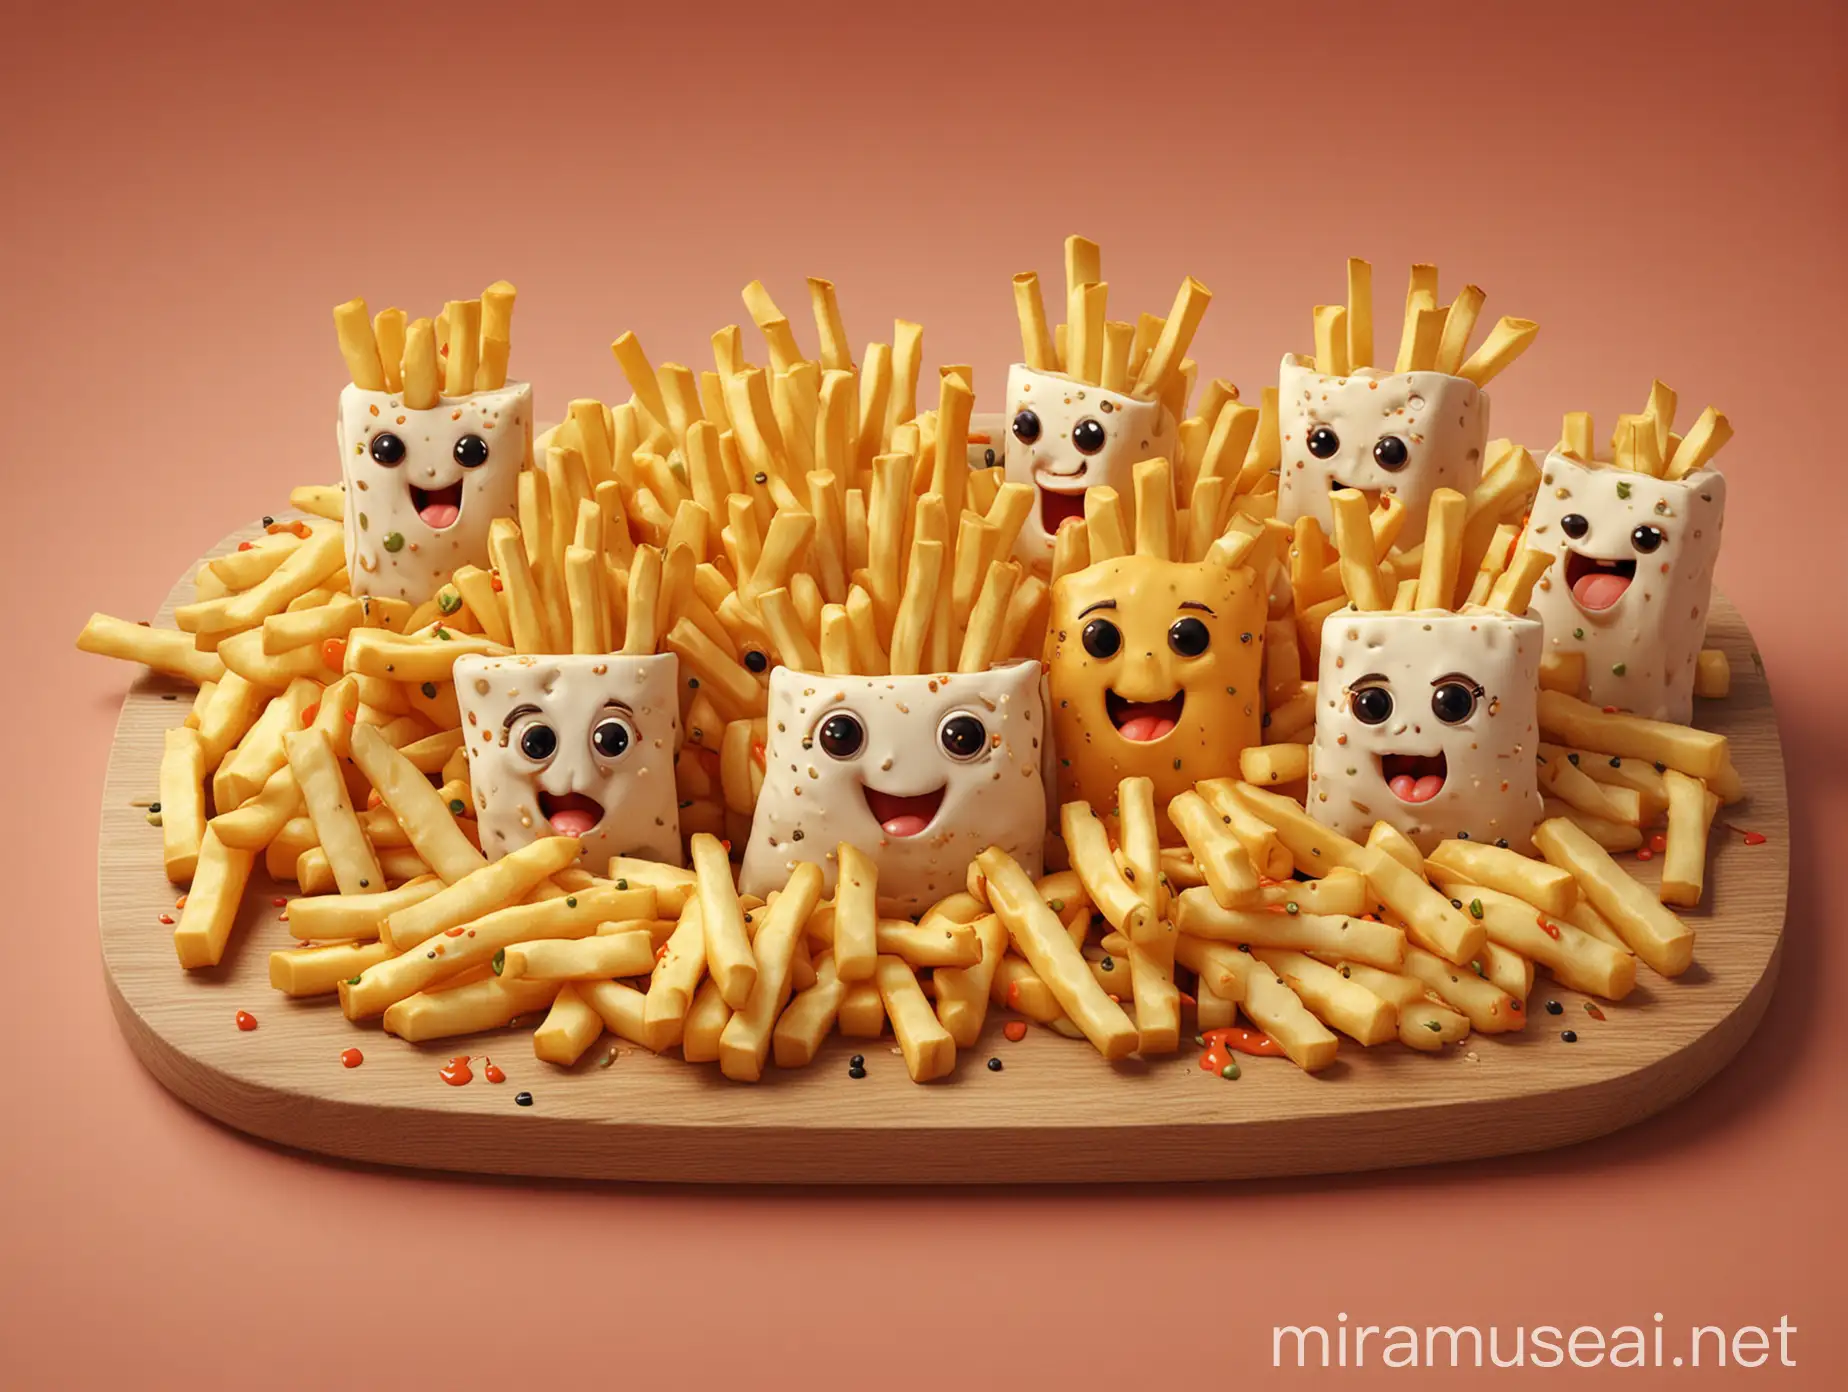 Adorable 3D Render of Cute Anime Food Characters